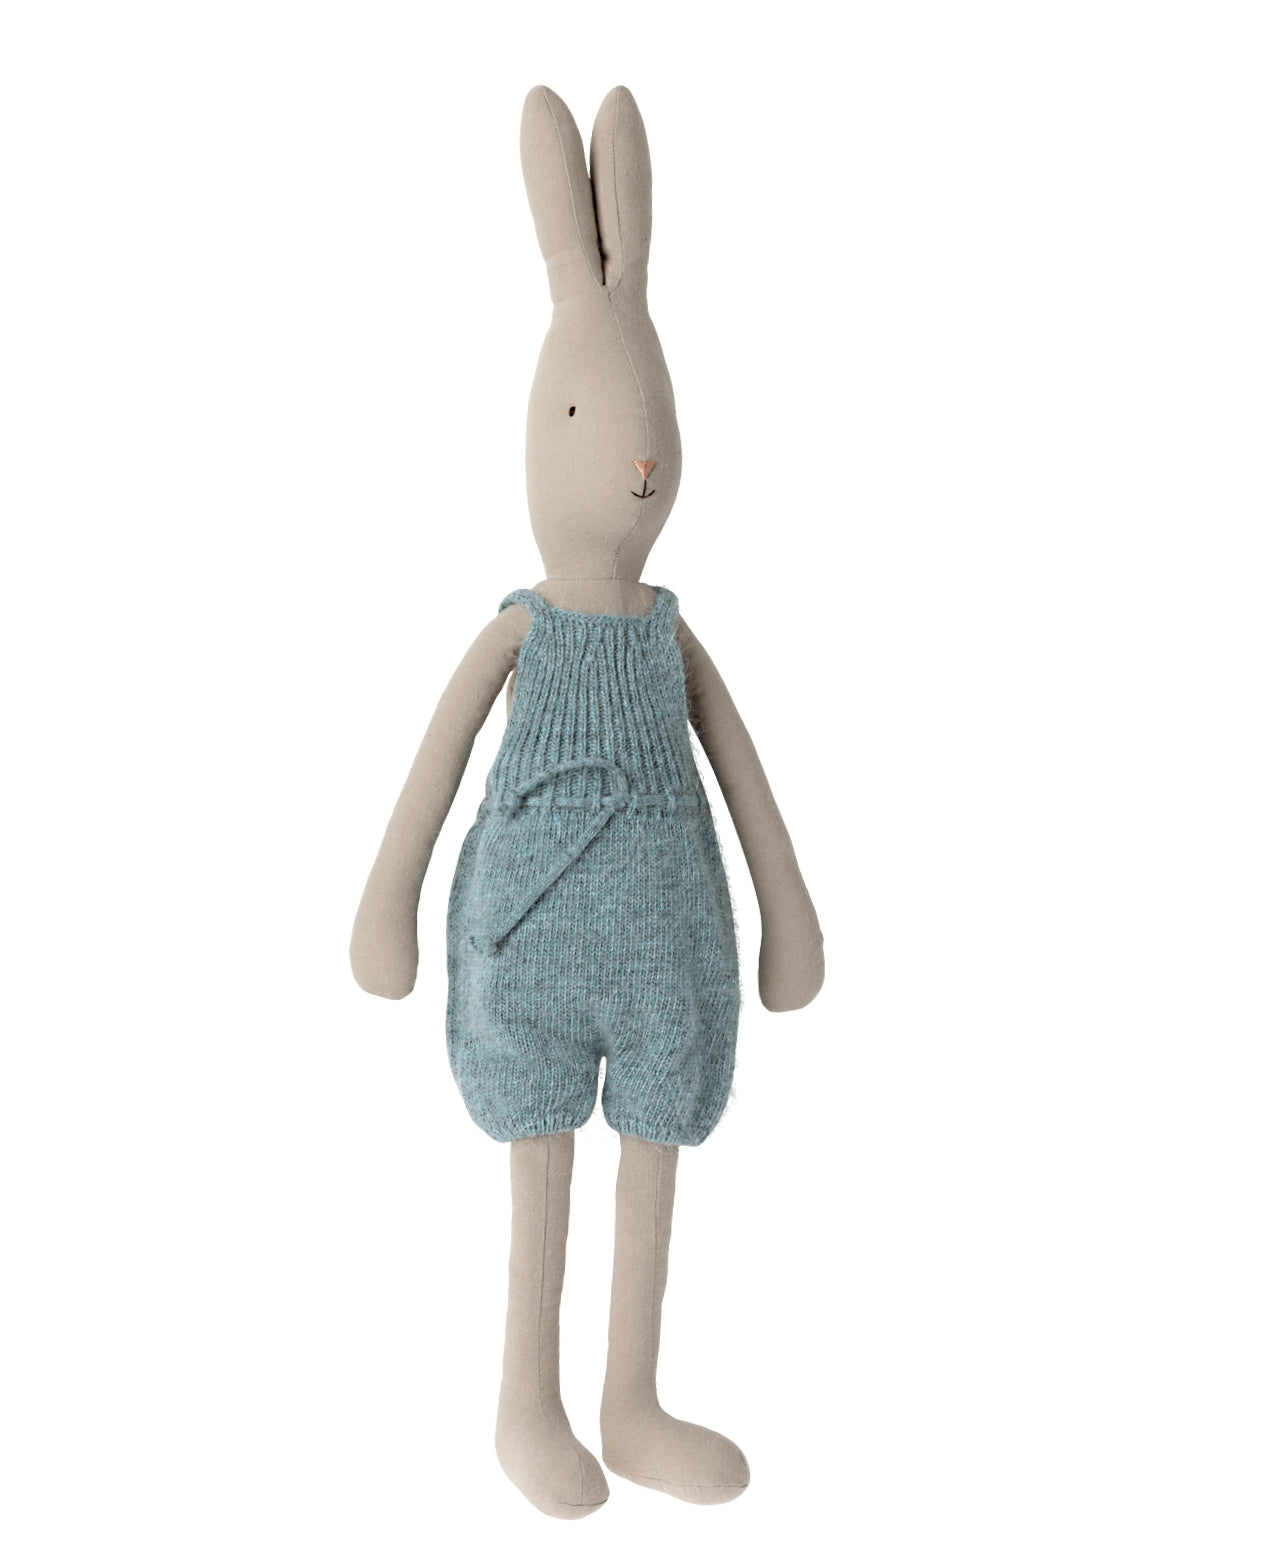 Maileg knitted overalls for rabbits and bunnies size 4